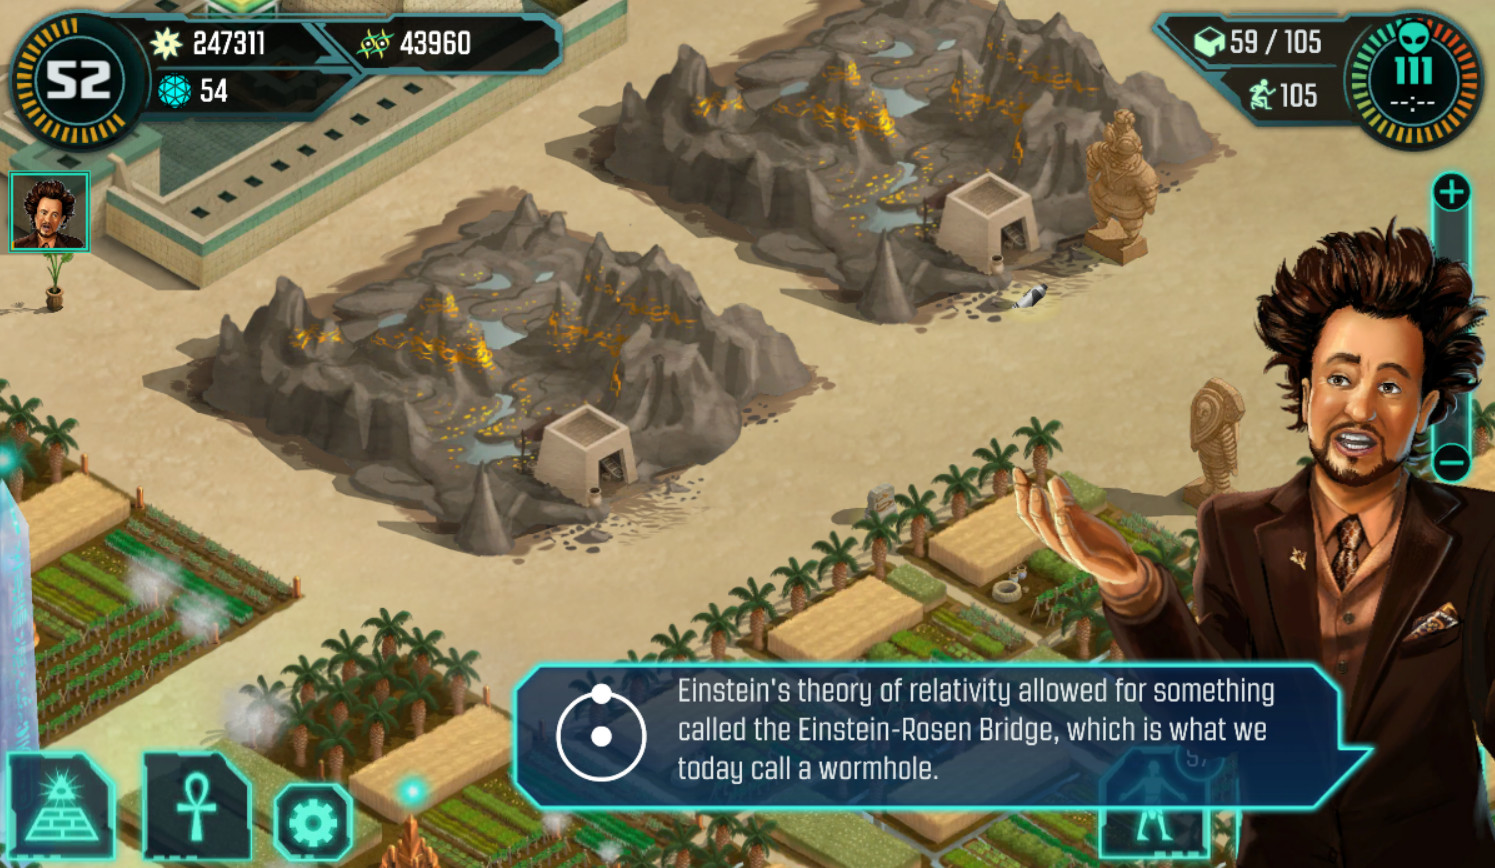 Ancient Aliens: The Game Free Download